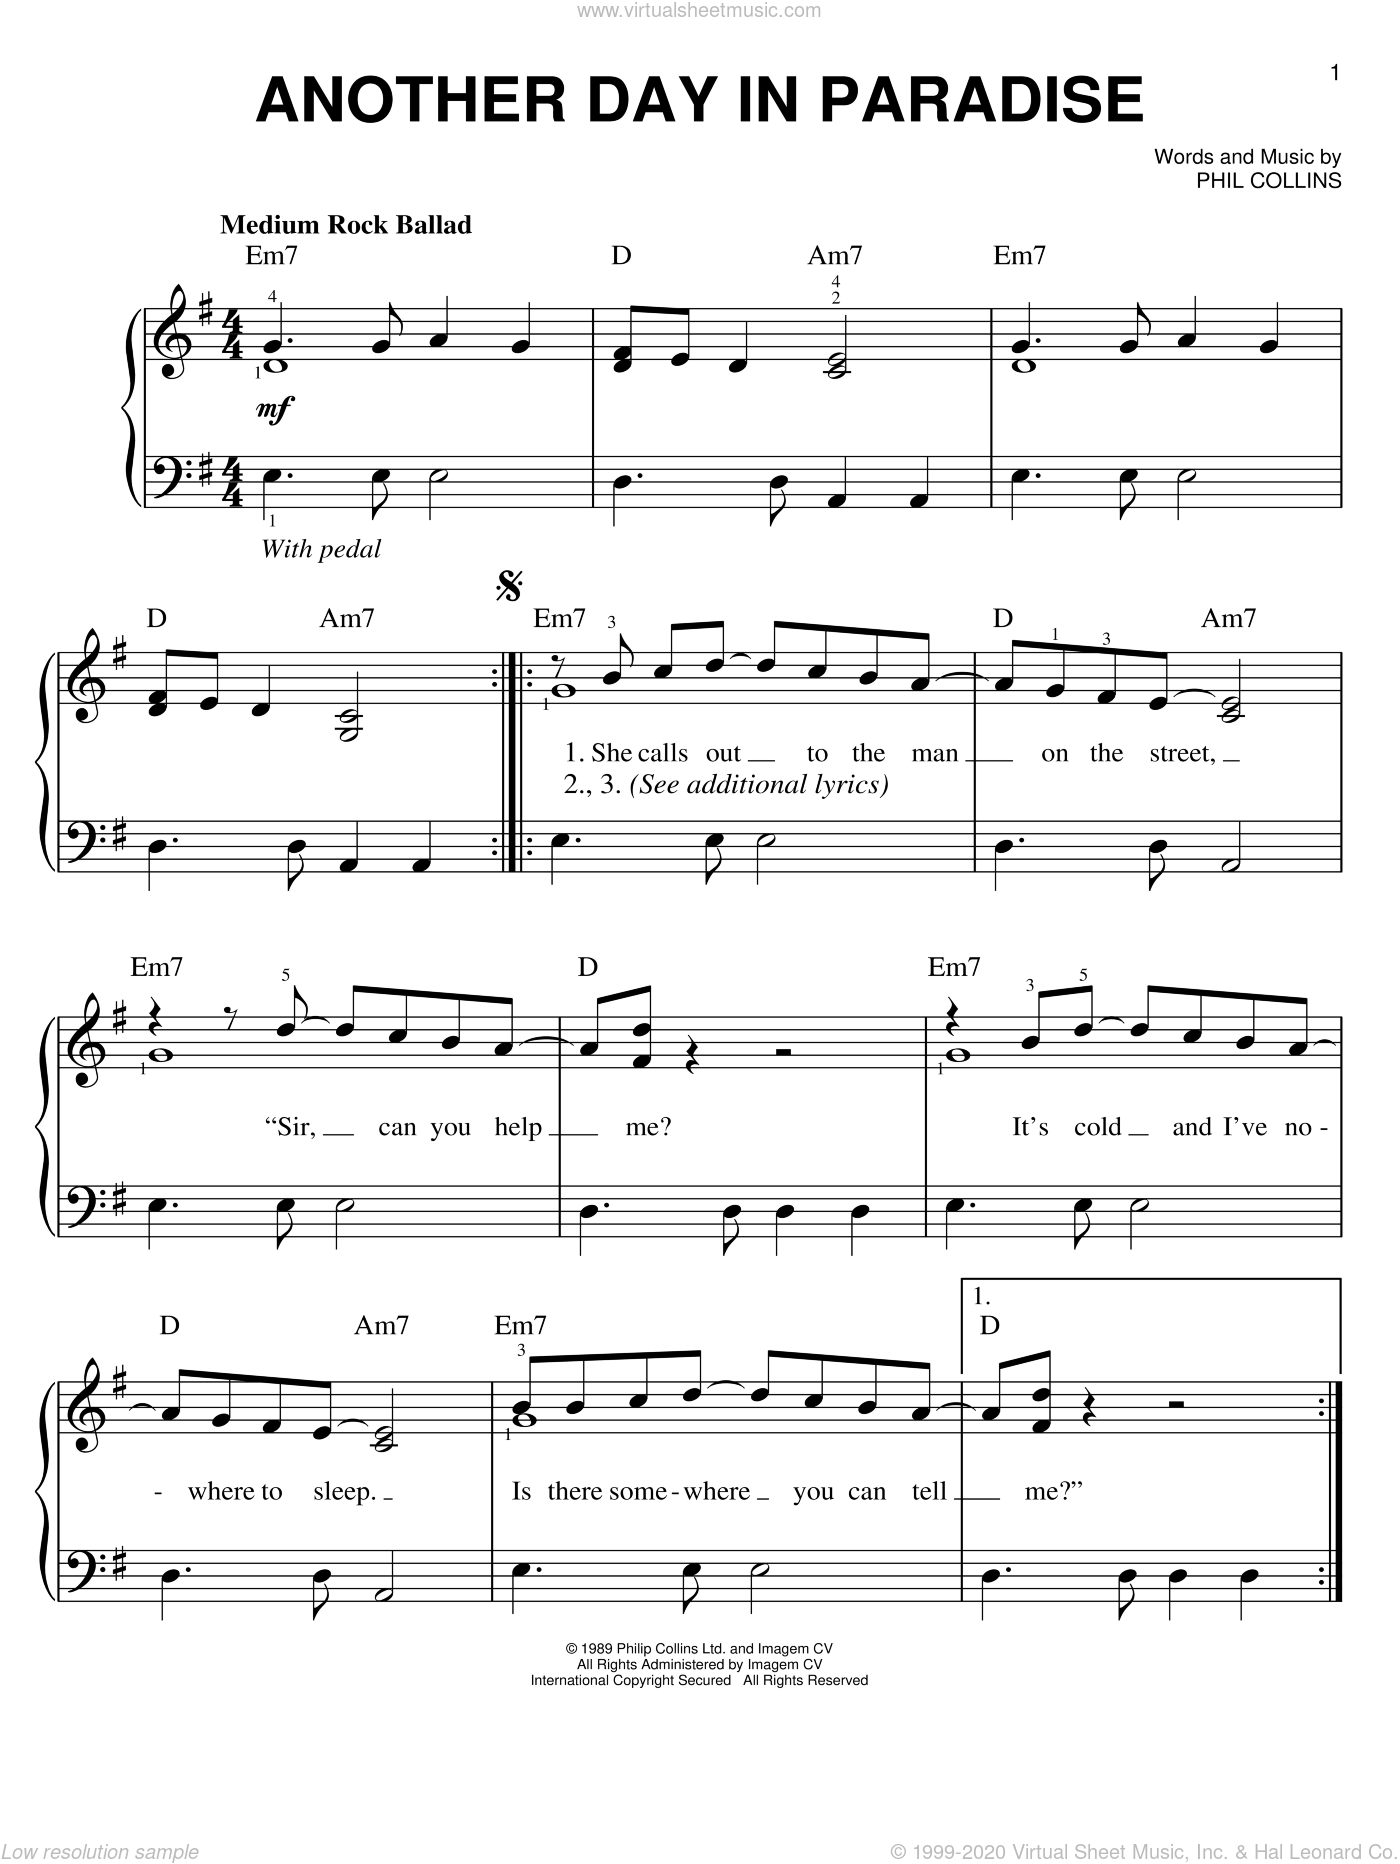 Collins - Another Day In Paradise sheet music for piano solo - Phil Collins Another Day In Paradise Letra